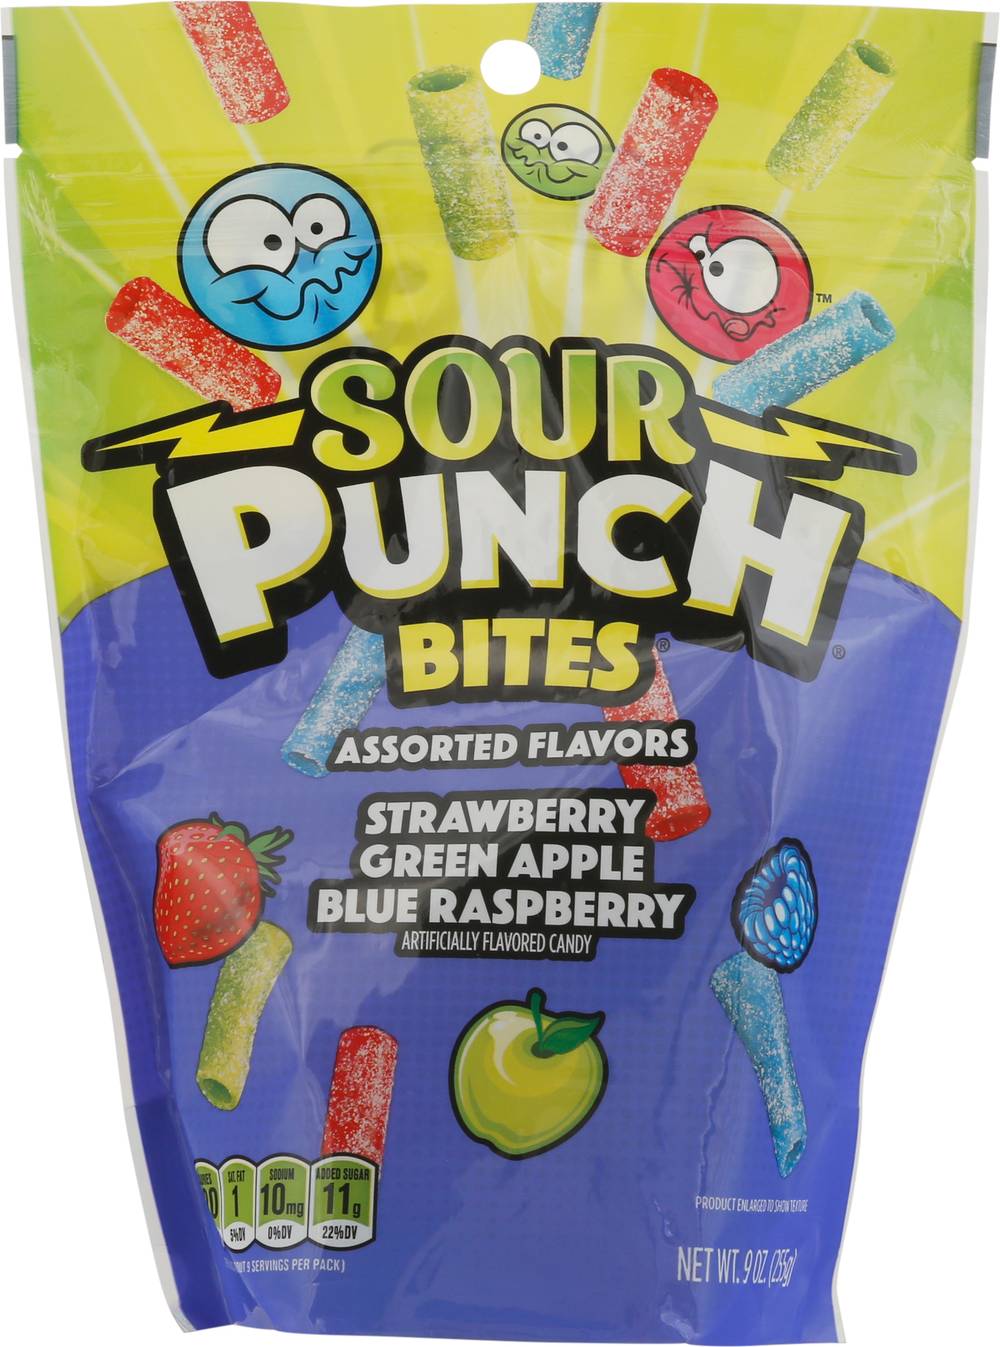 Sour Punch Bites Assorted (strawberry, green apple, blue raspberry)